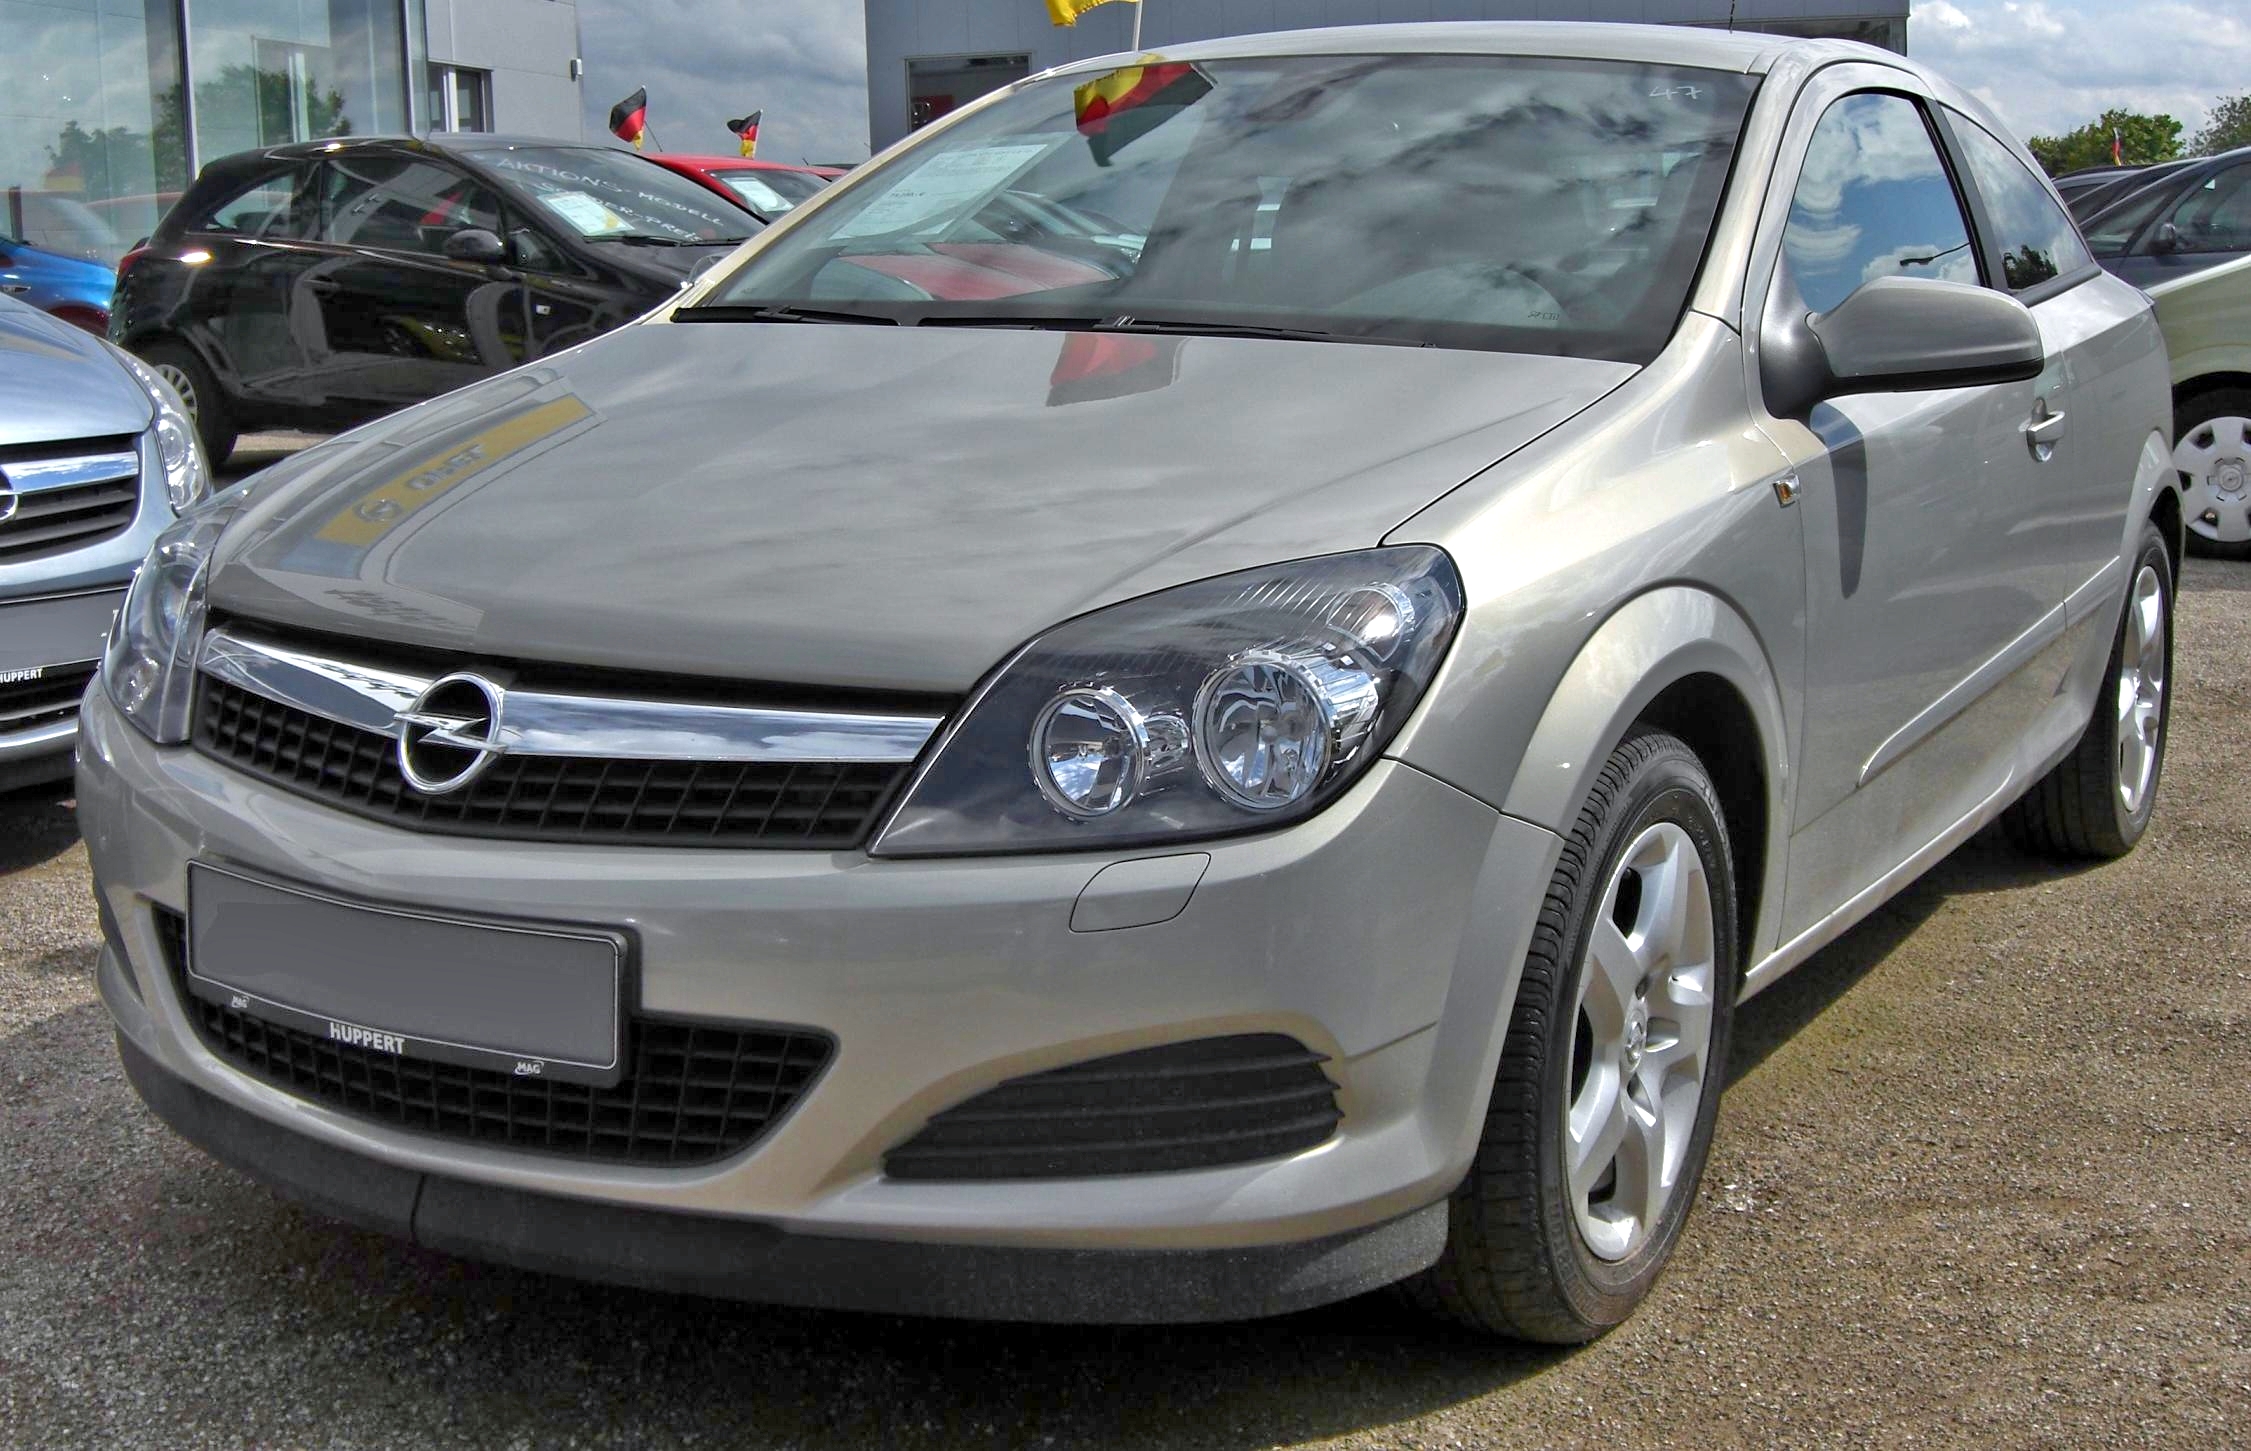 File:Opel Astra J GTC Front-view.JPG - Wikimedia Commons